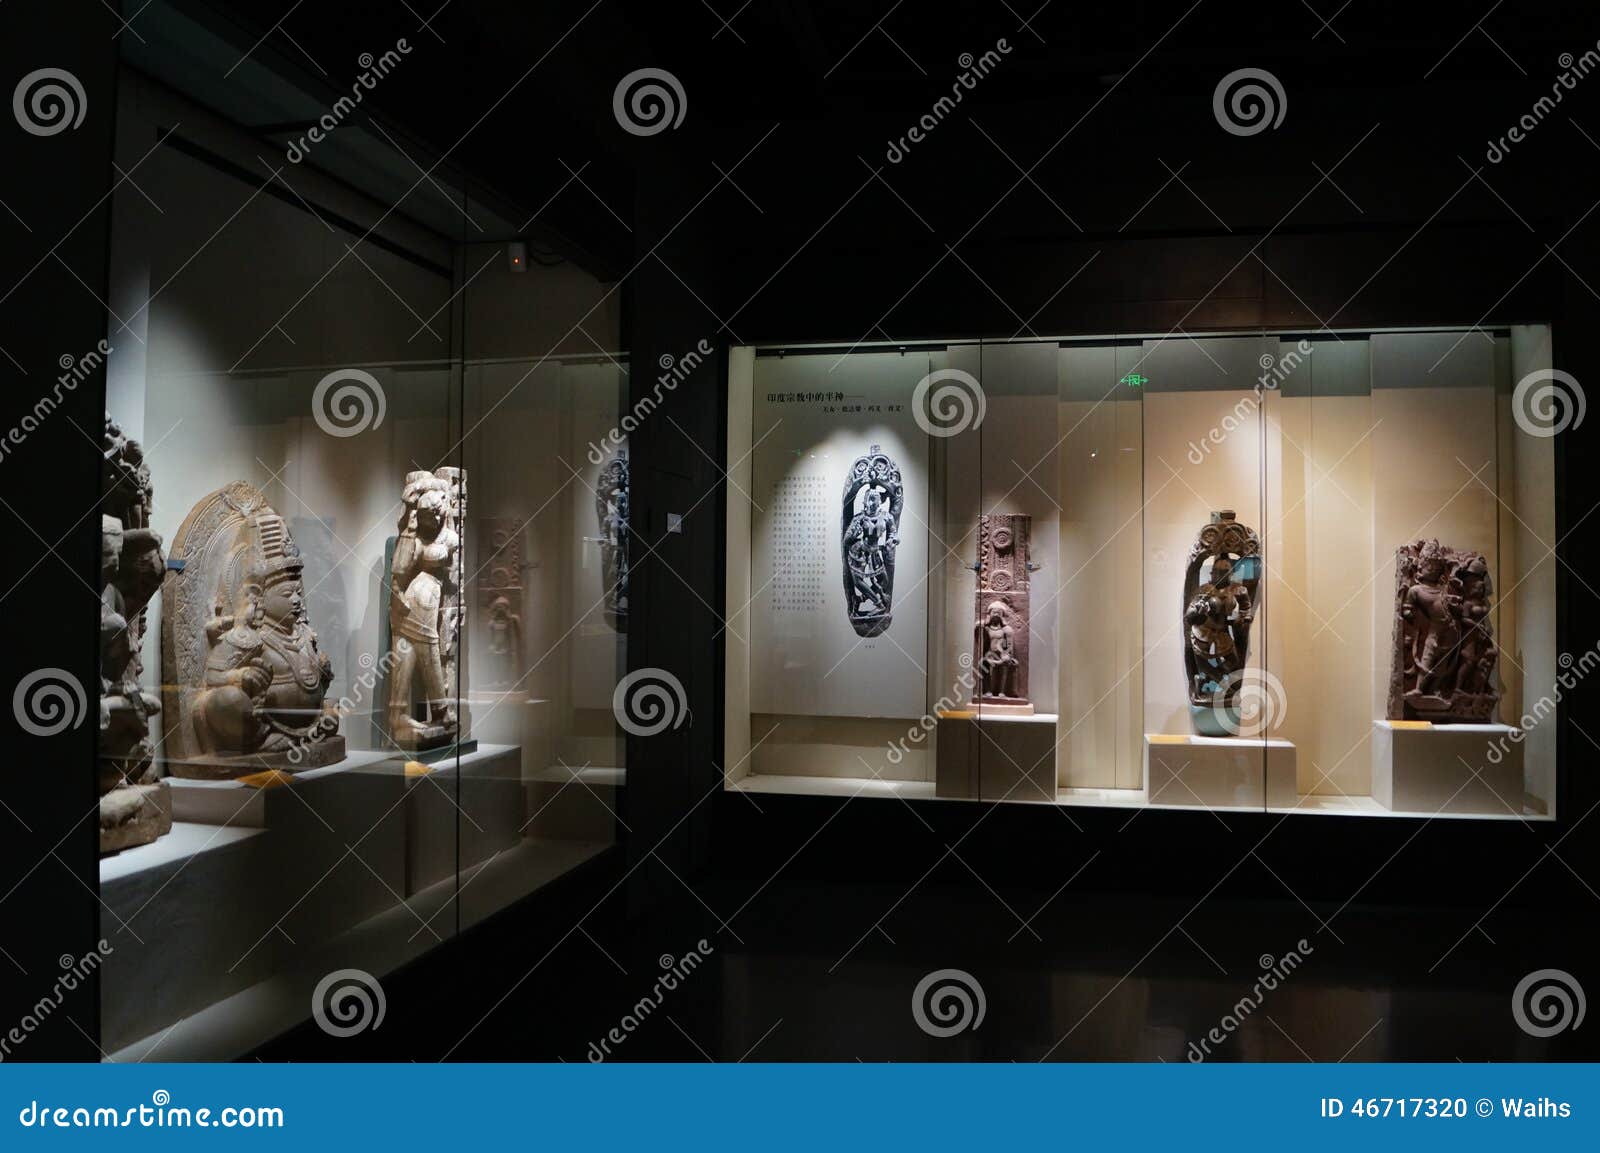 Shenzhen Museum Sculpture Exhibition Editorial Image - Image of ...